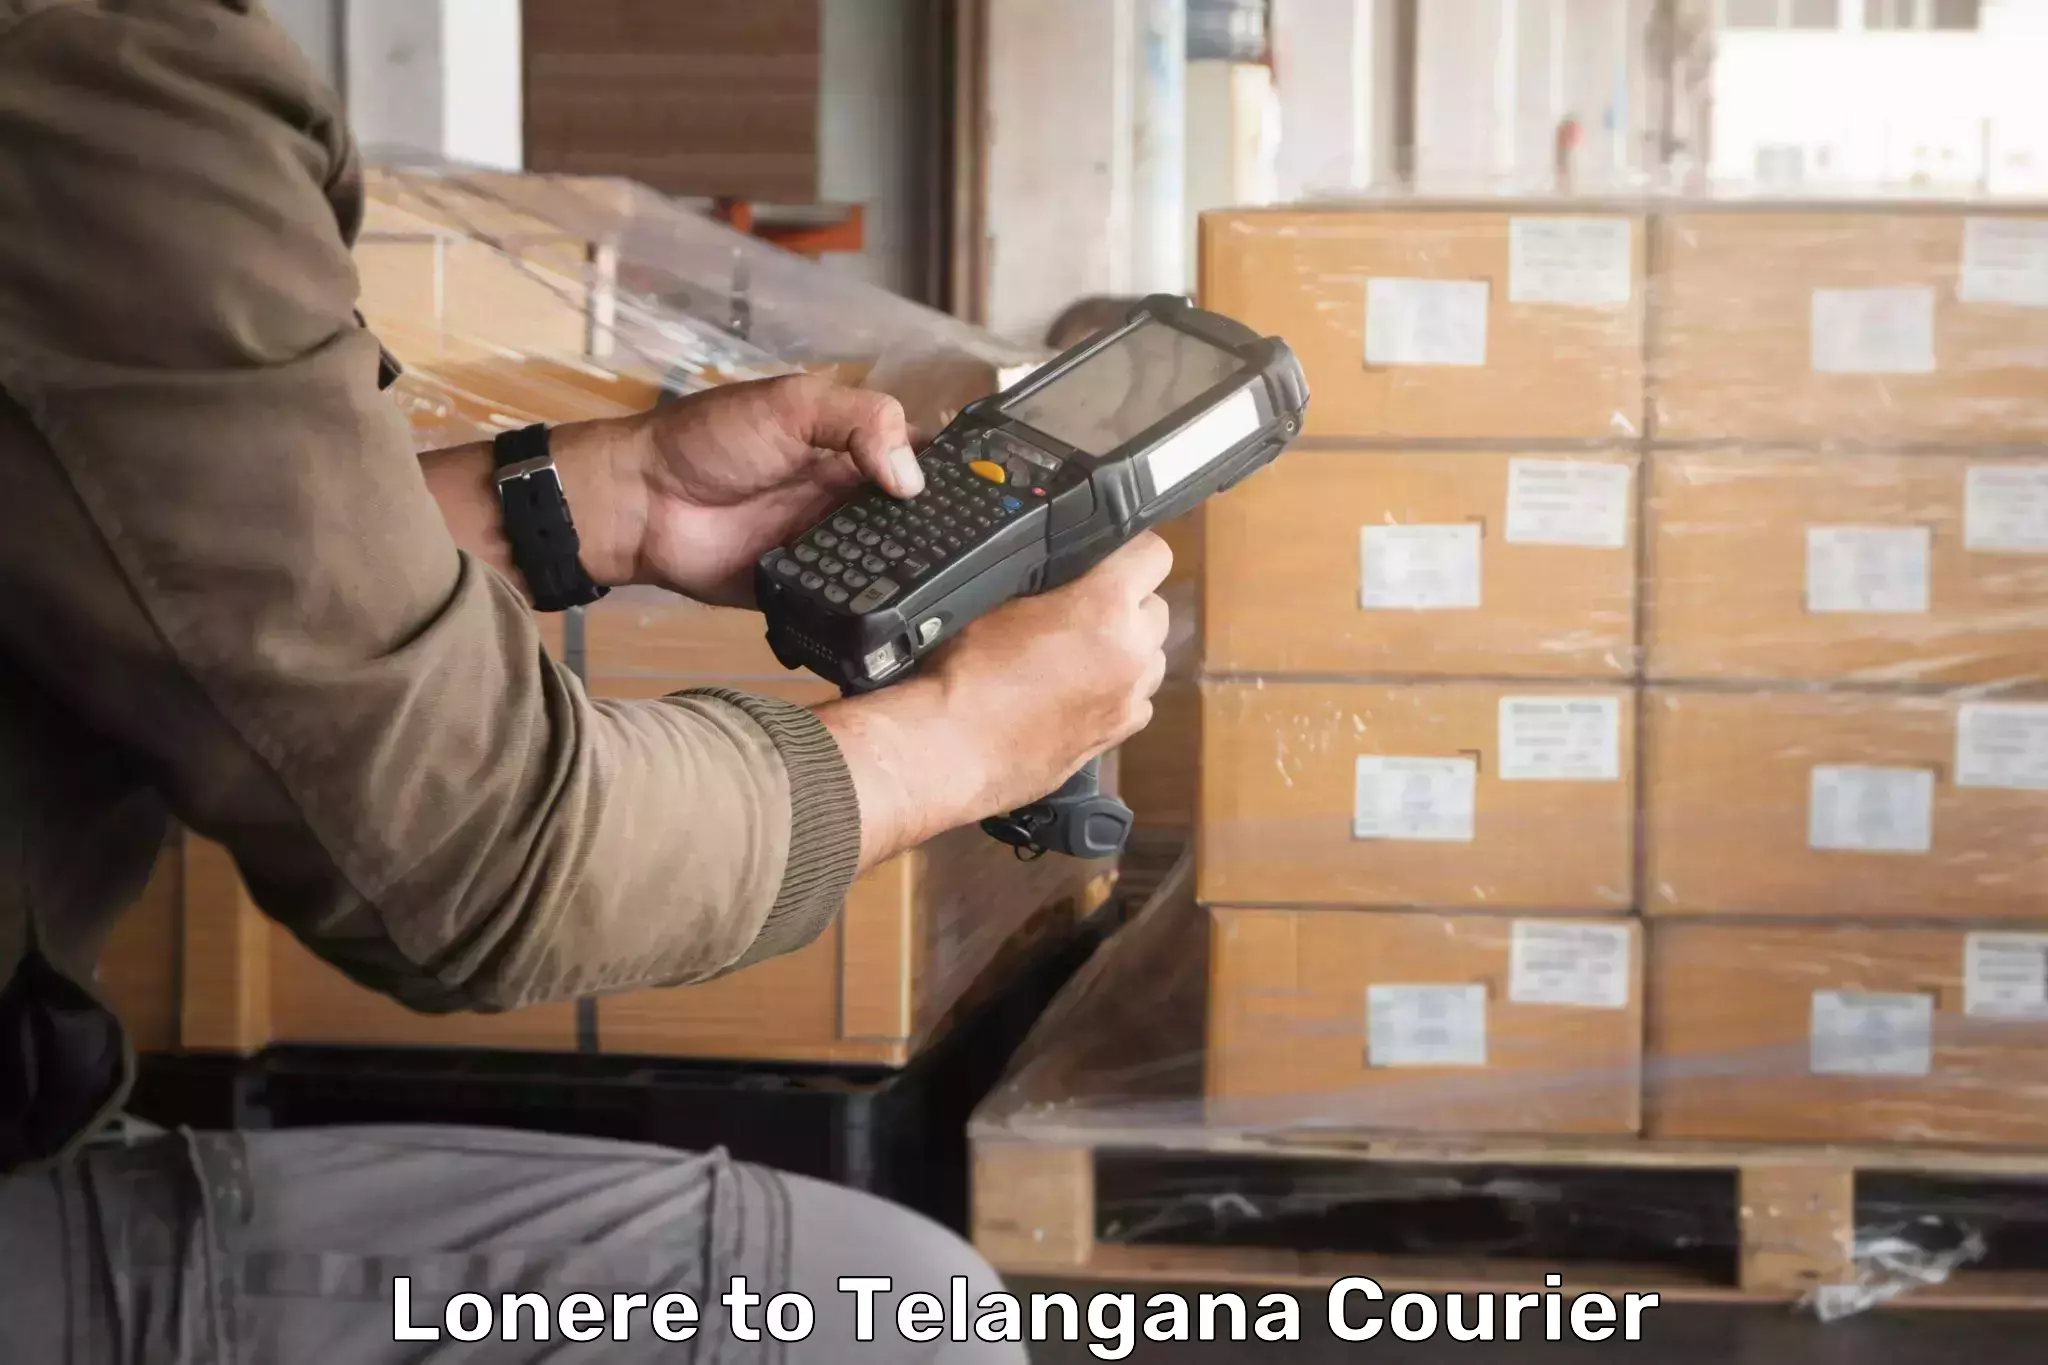 Business delivery service Lonere to Telangana